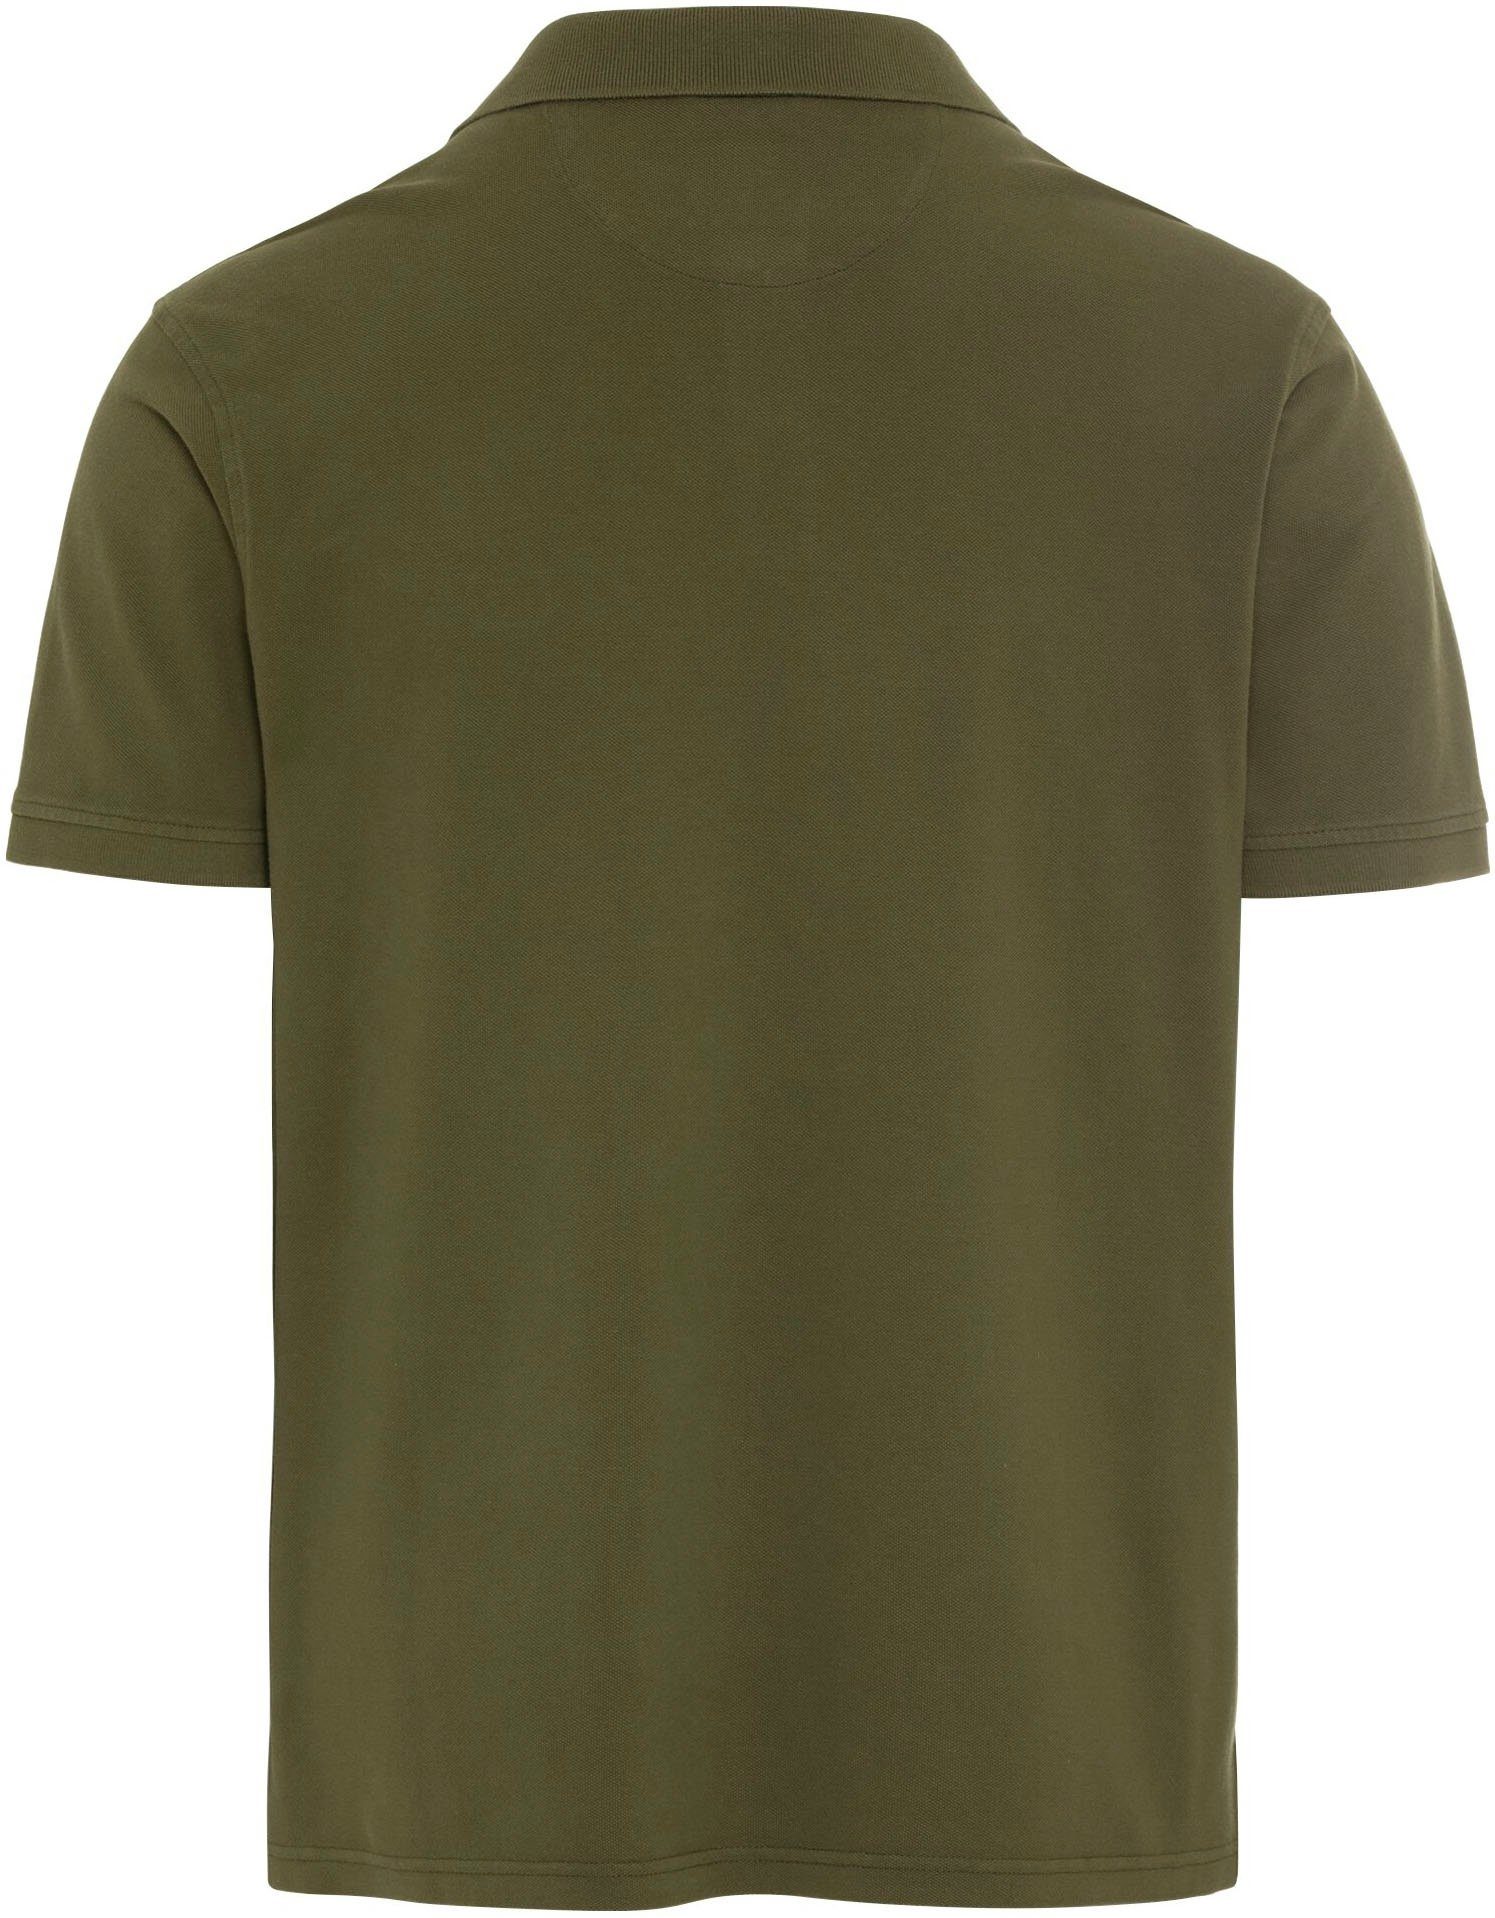 active Poloshirt camel Olive brown